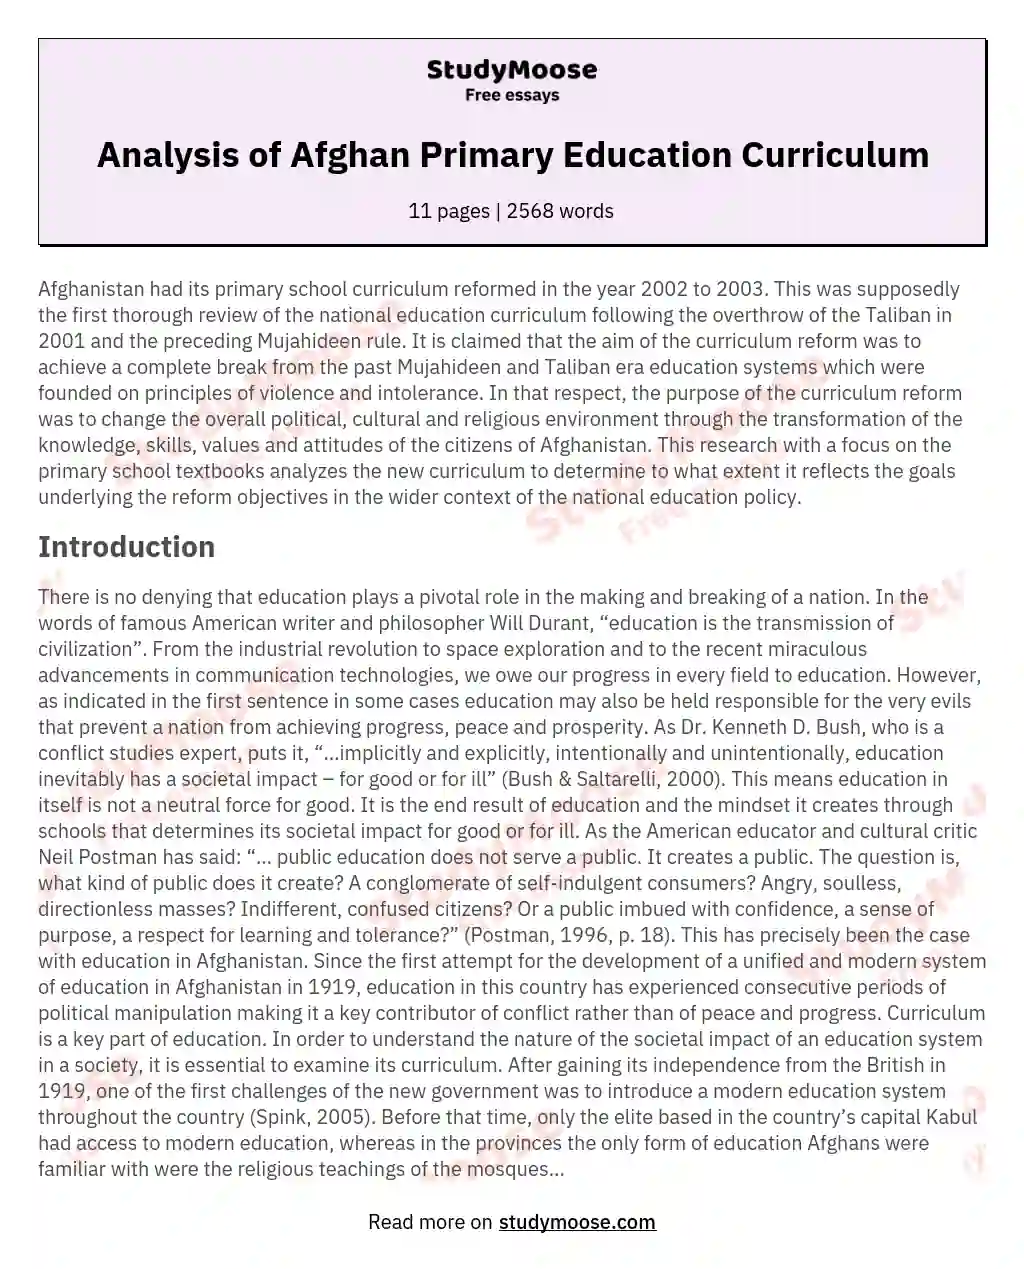 Analysis of Afghan Primary Education Curriculum essay